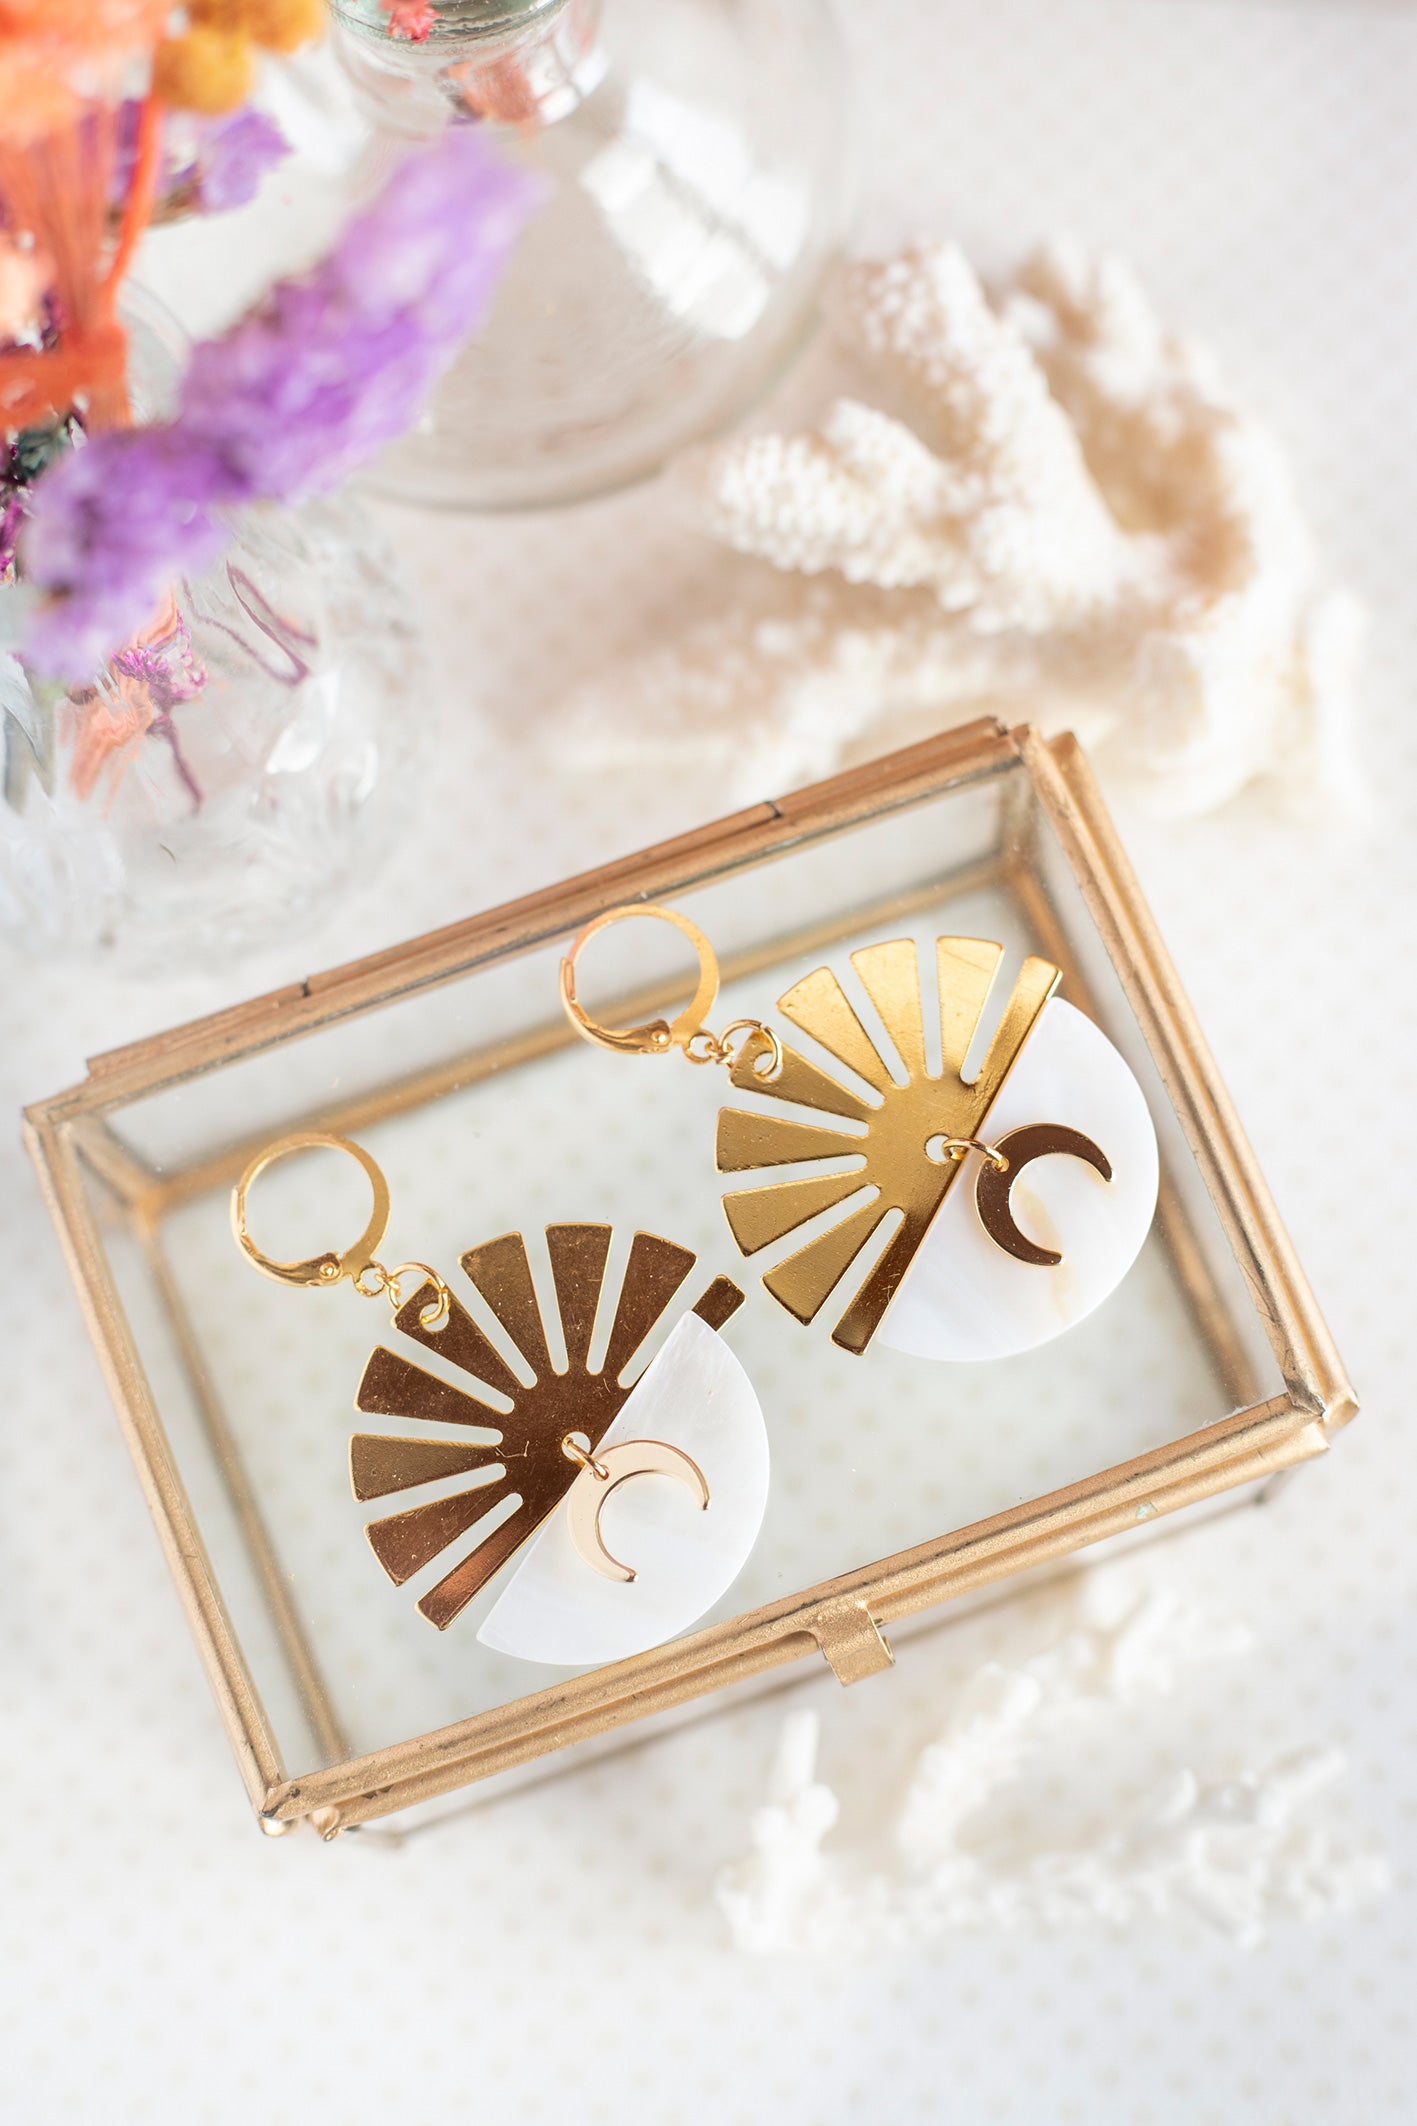 Half sun earrings and mother-of-pearl pendants